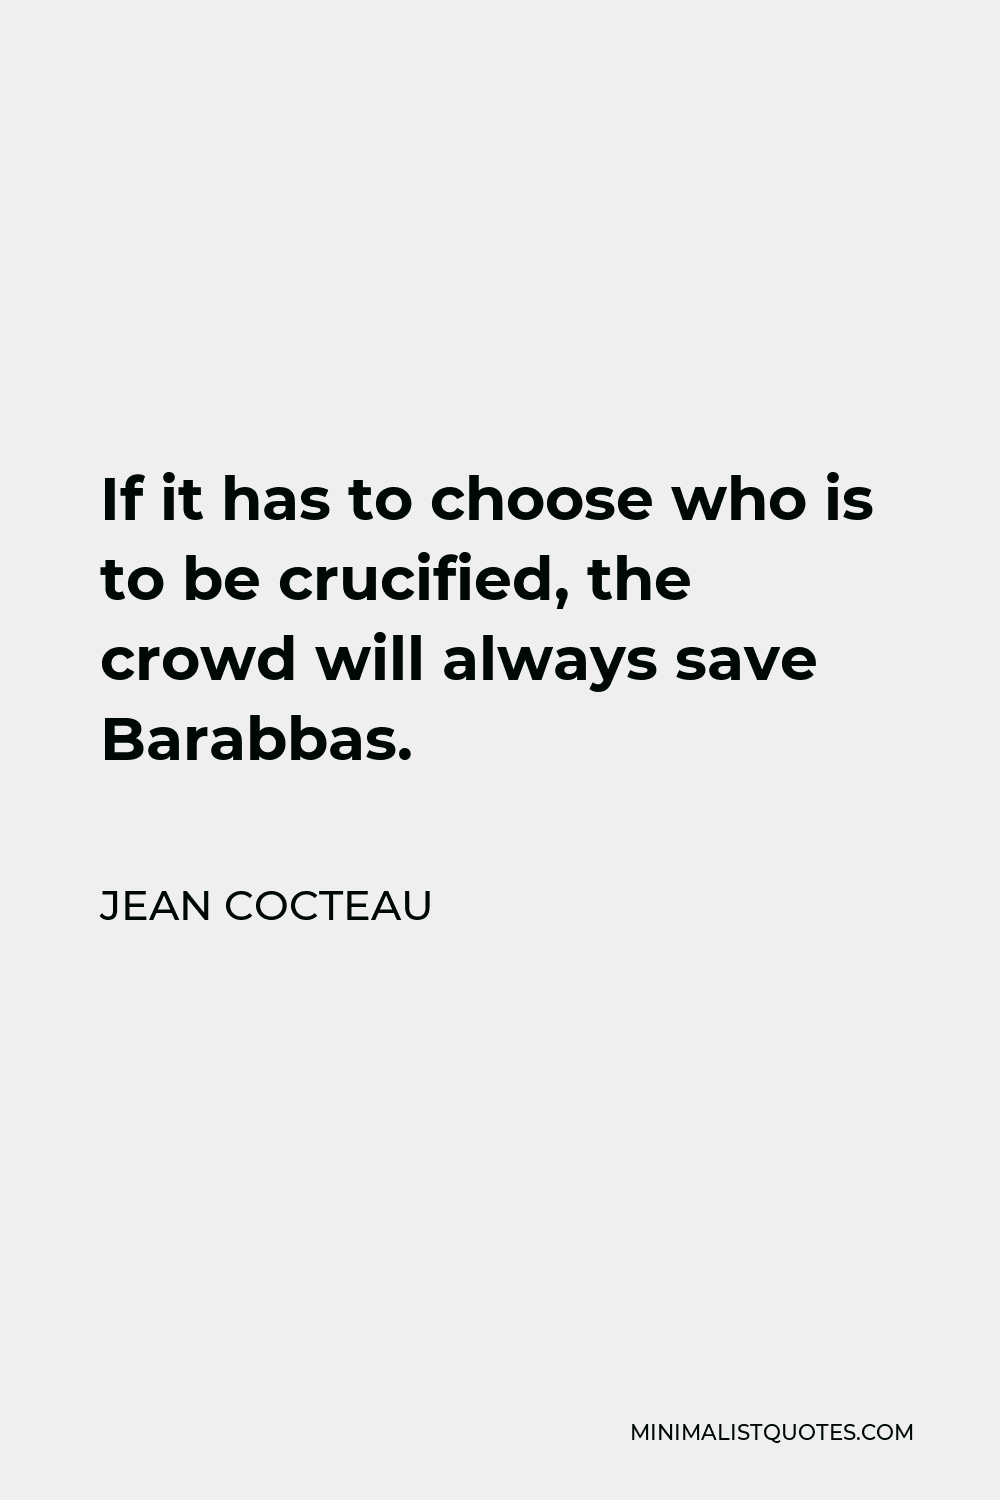 Jean Cocteau Quote - If it has to choose who is to be crucified, the crowd will always save Barabbas.